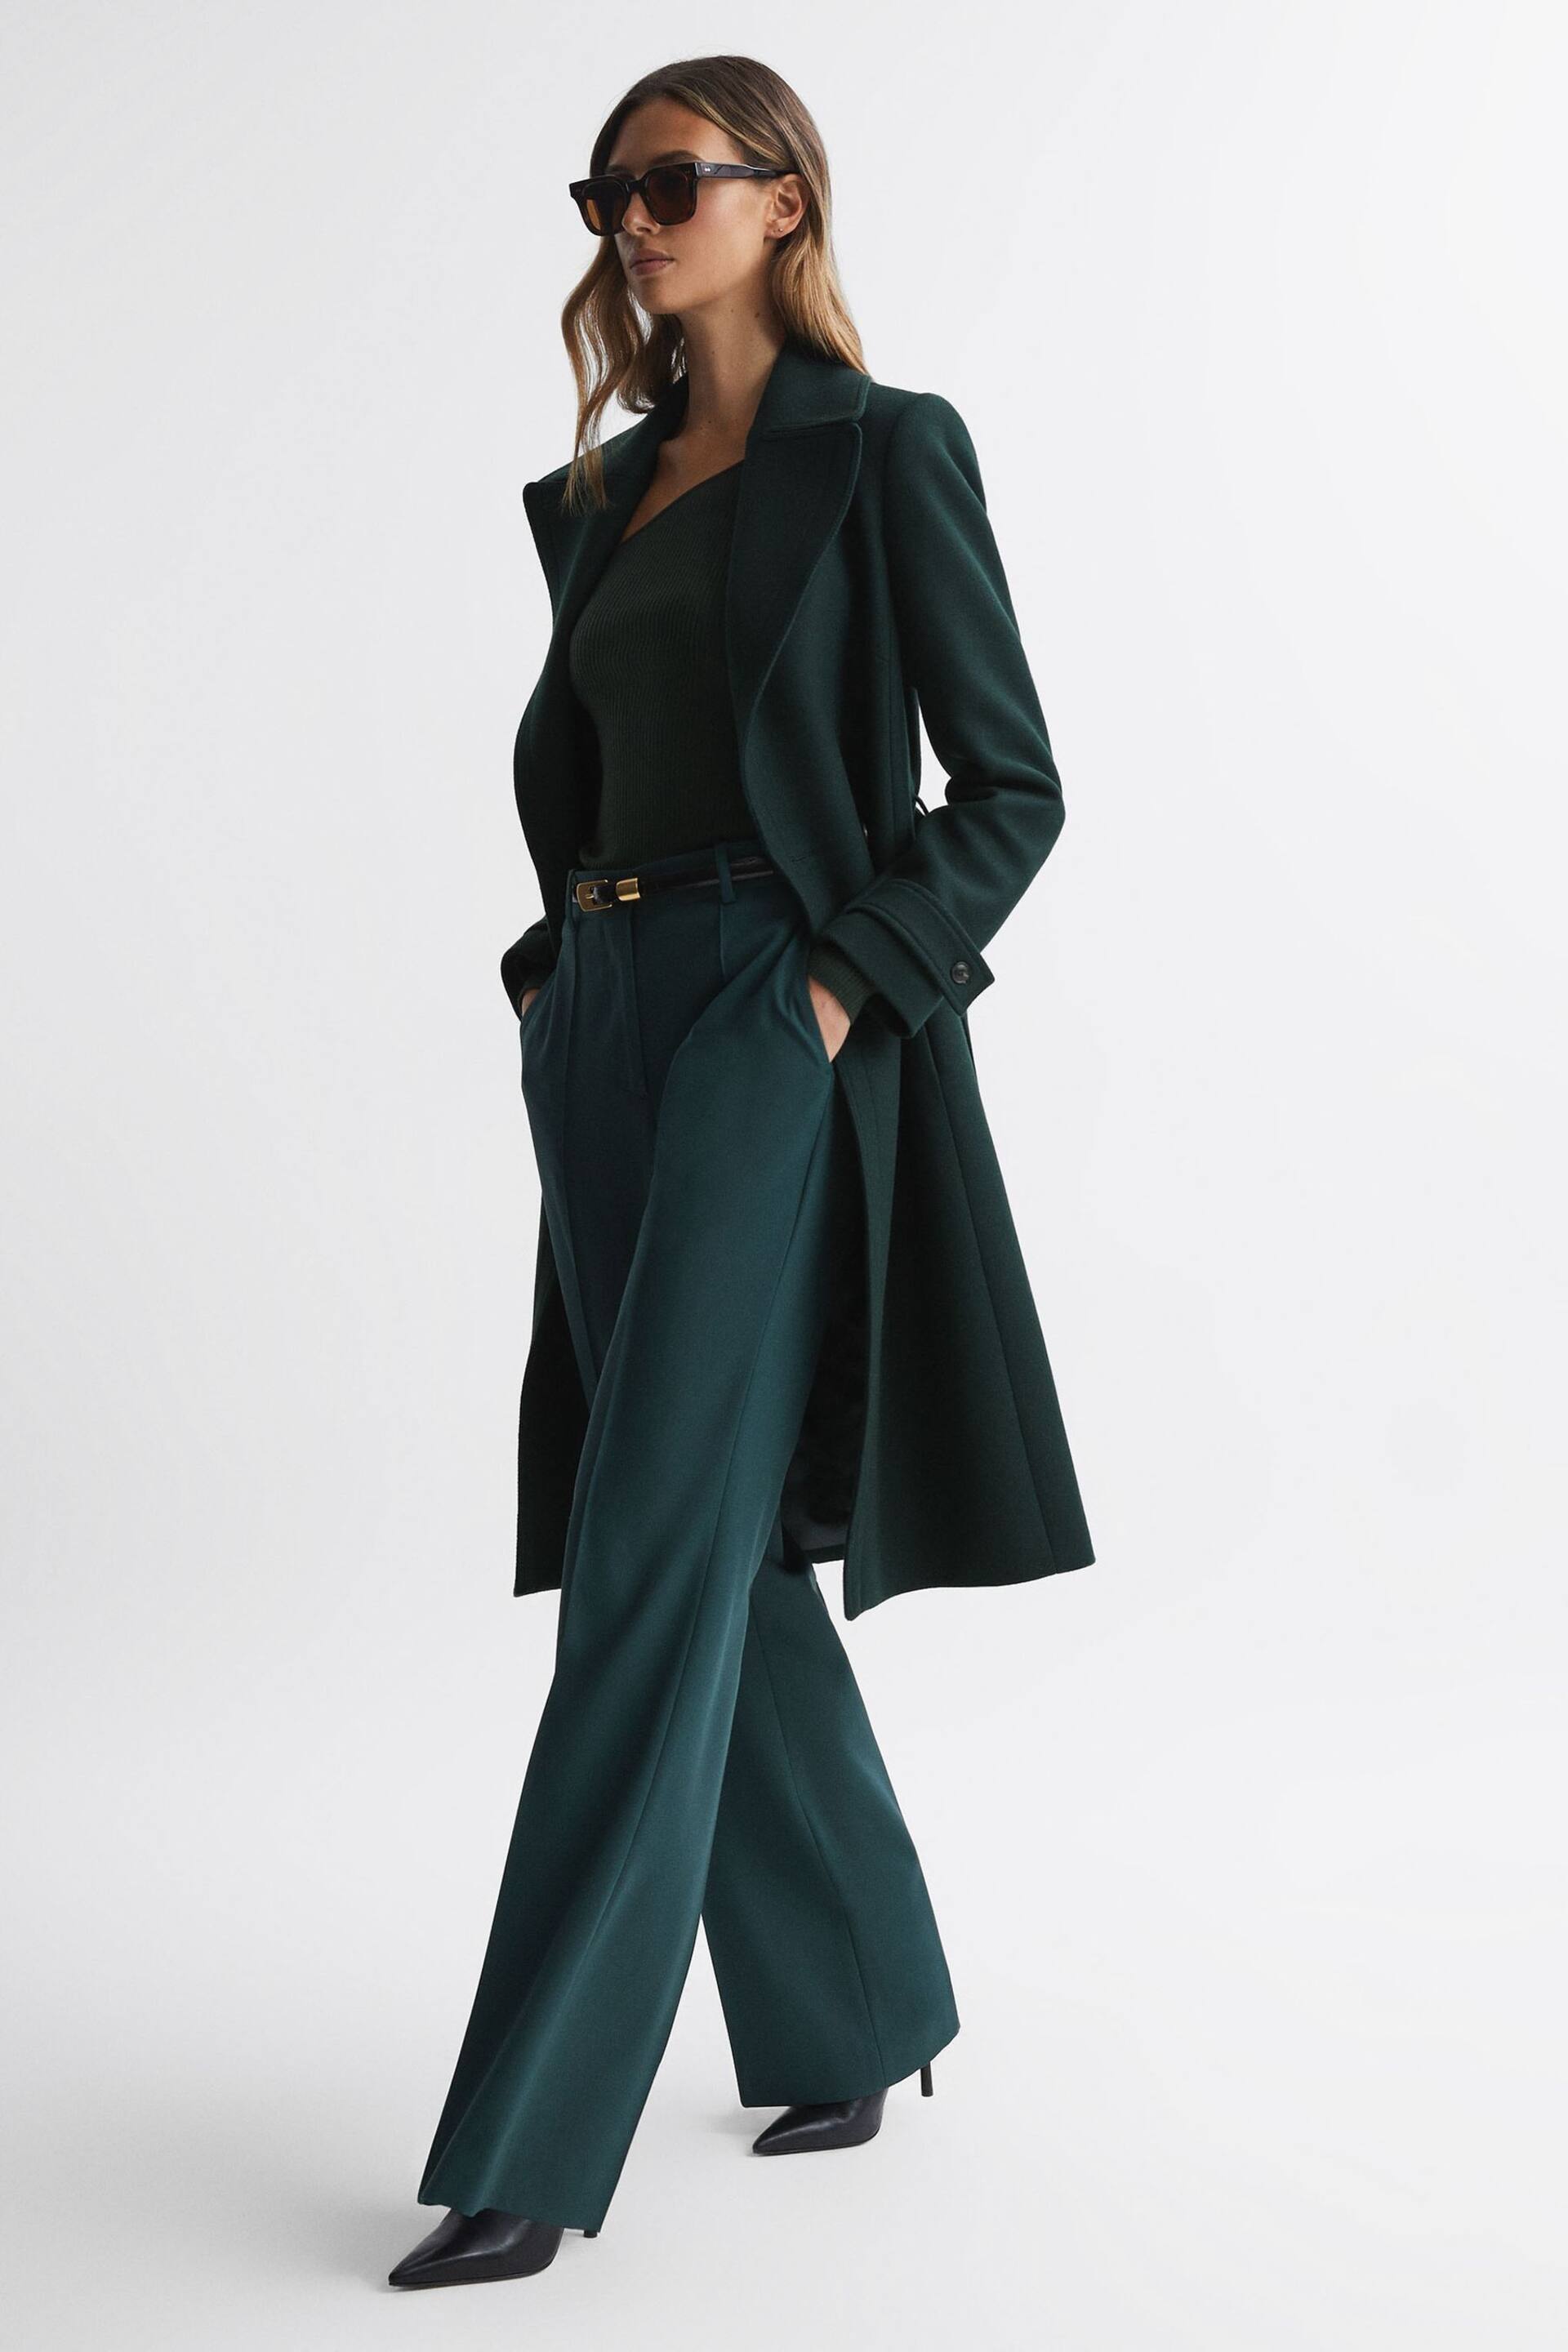 Reiss Green Tor Relaxed Wool Blend Belted Coat - Image 1 of 5